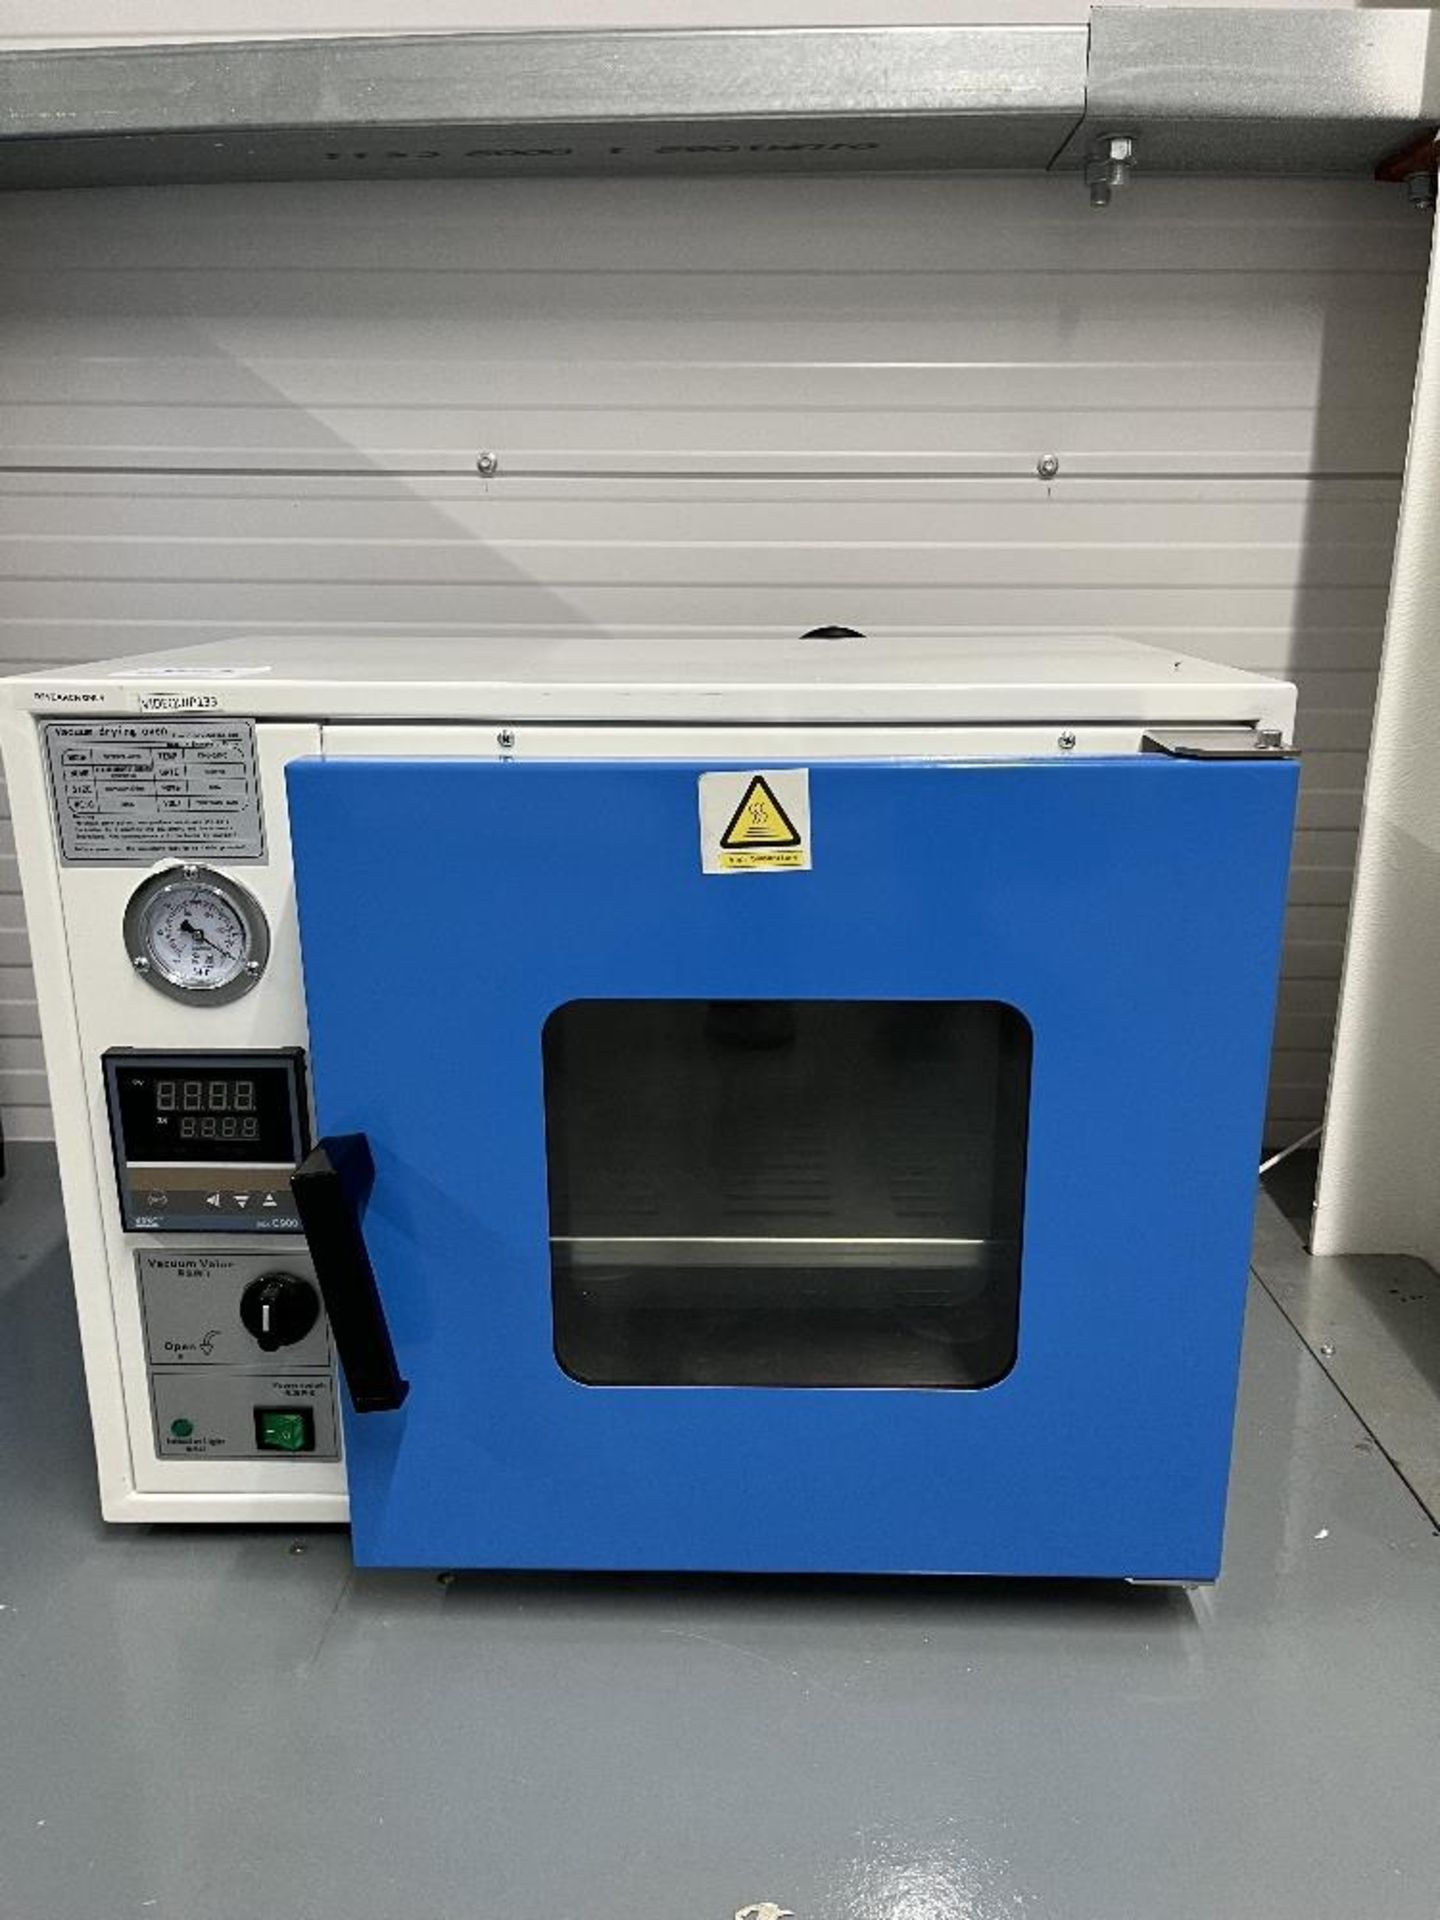 SYZKGZX-6020 Vacuum Drying Oven - Image 2 of 6